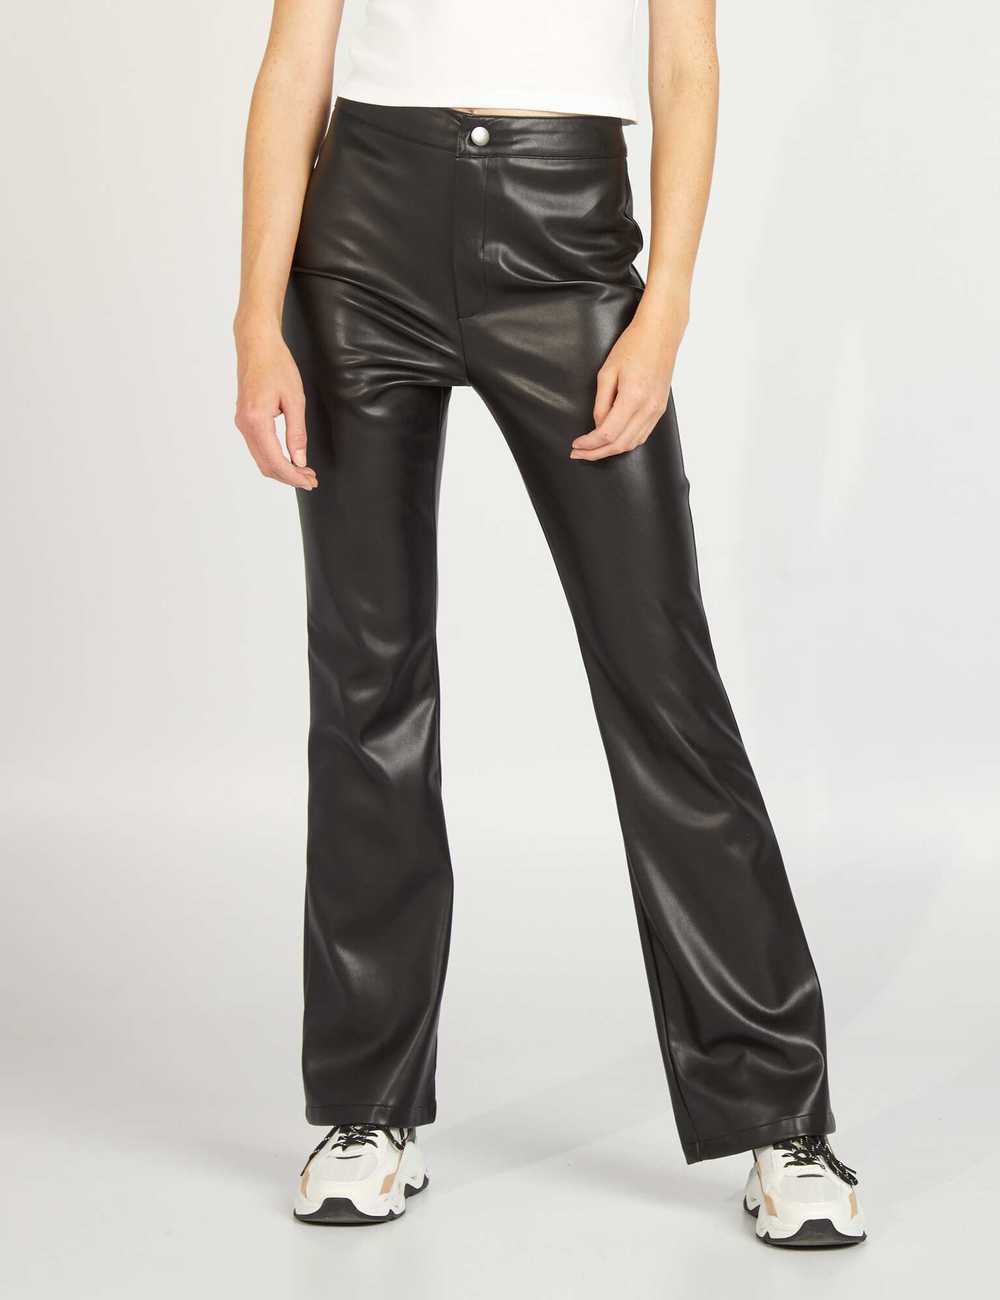 Buy Joseph Leather Trousers online - 23 products | FASHIOLA.in